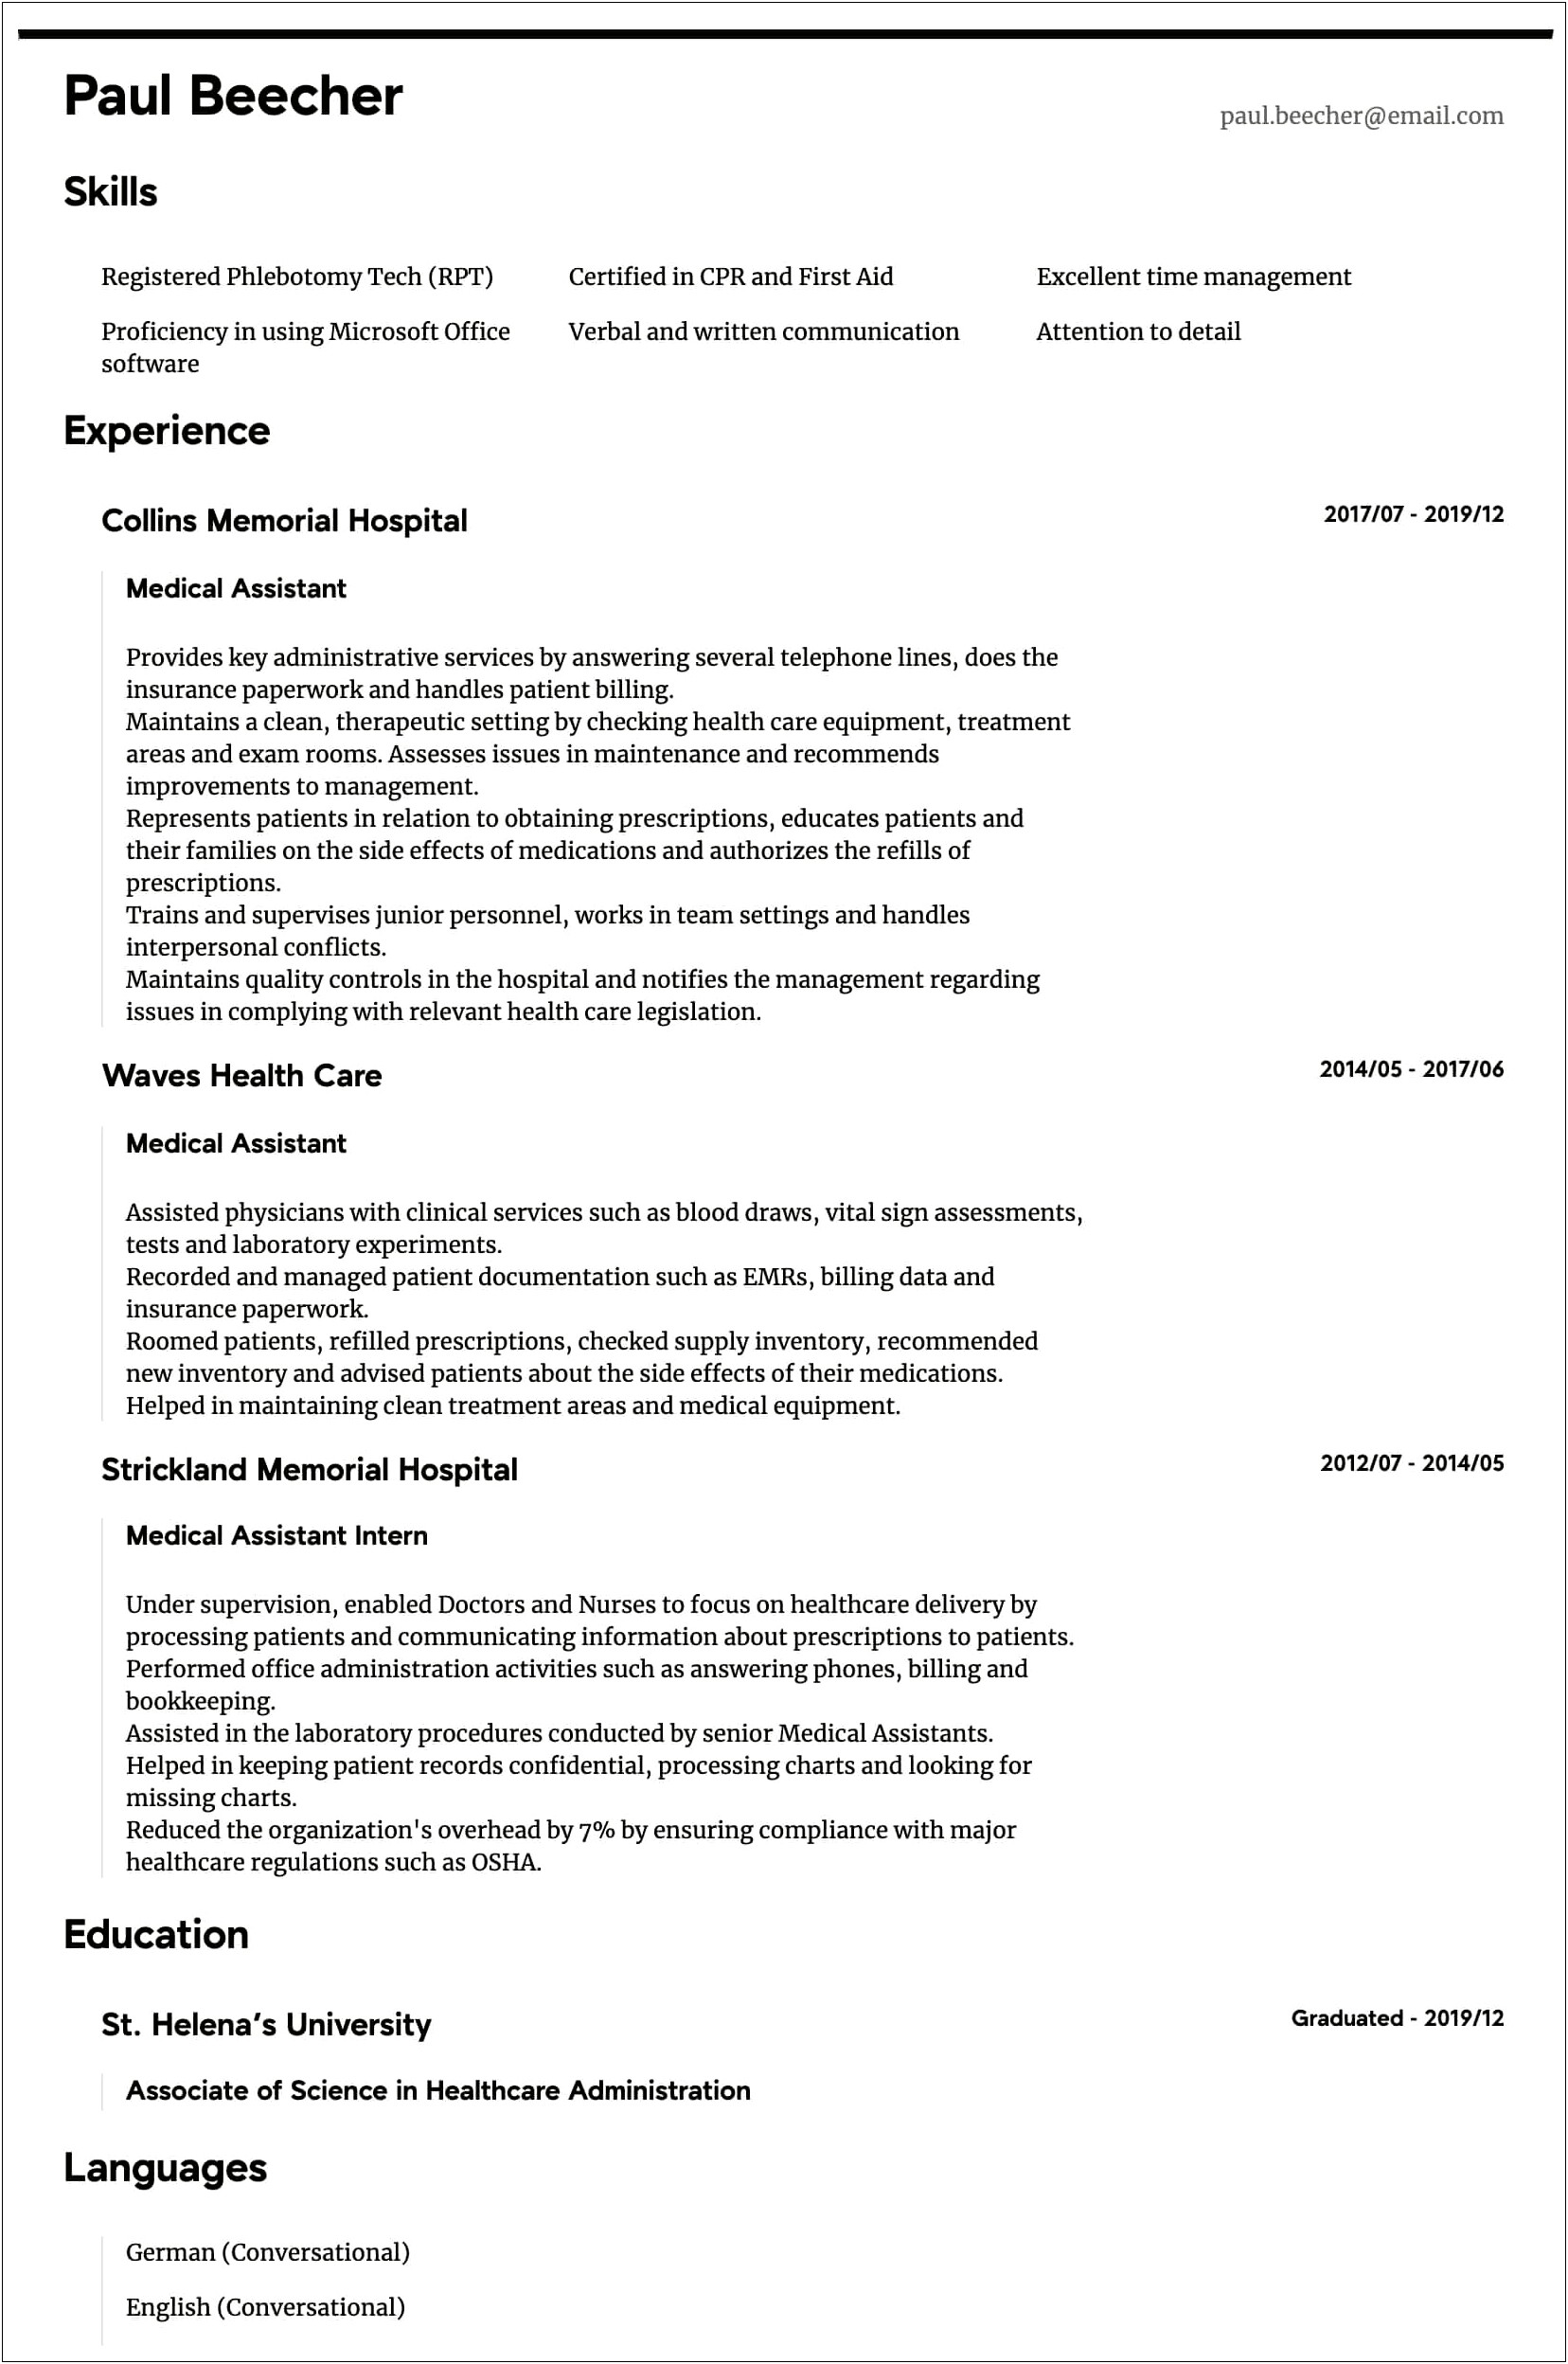 Career Objective On Resume For Medical Assistant